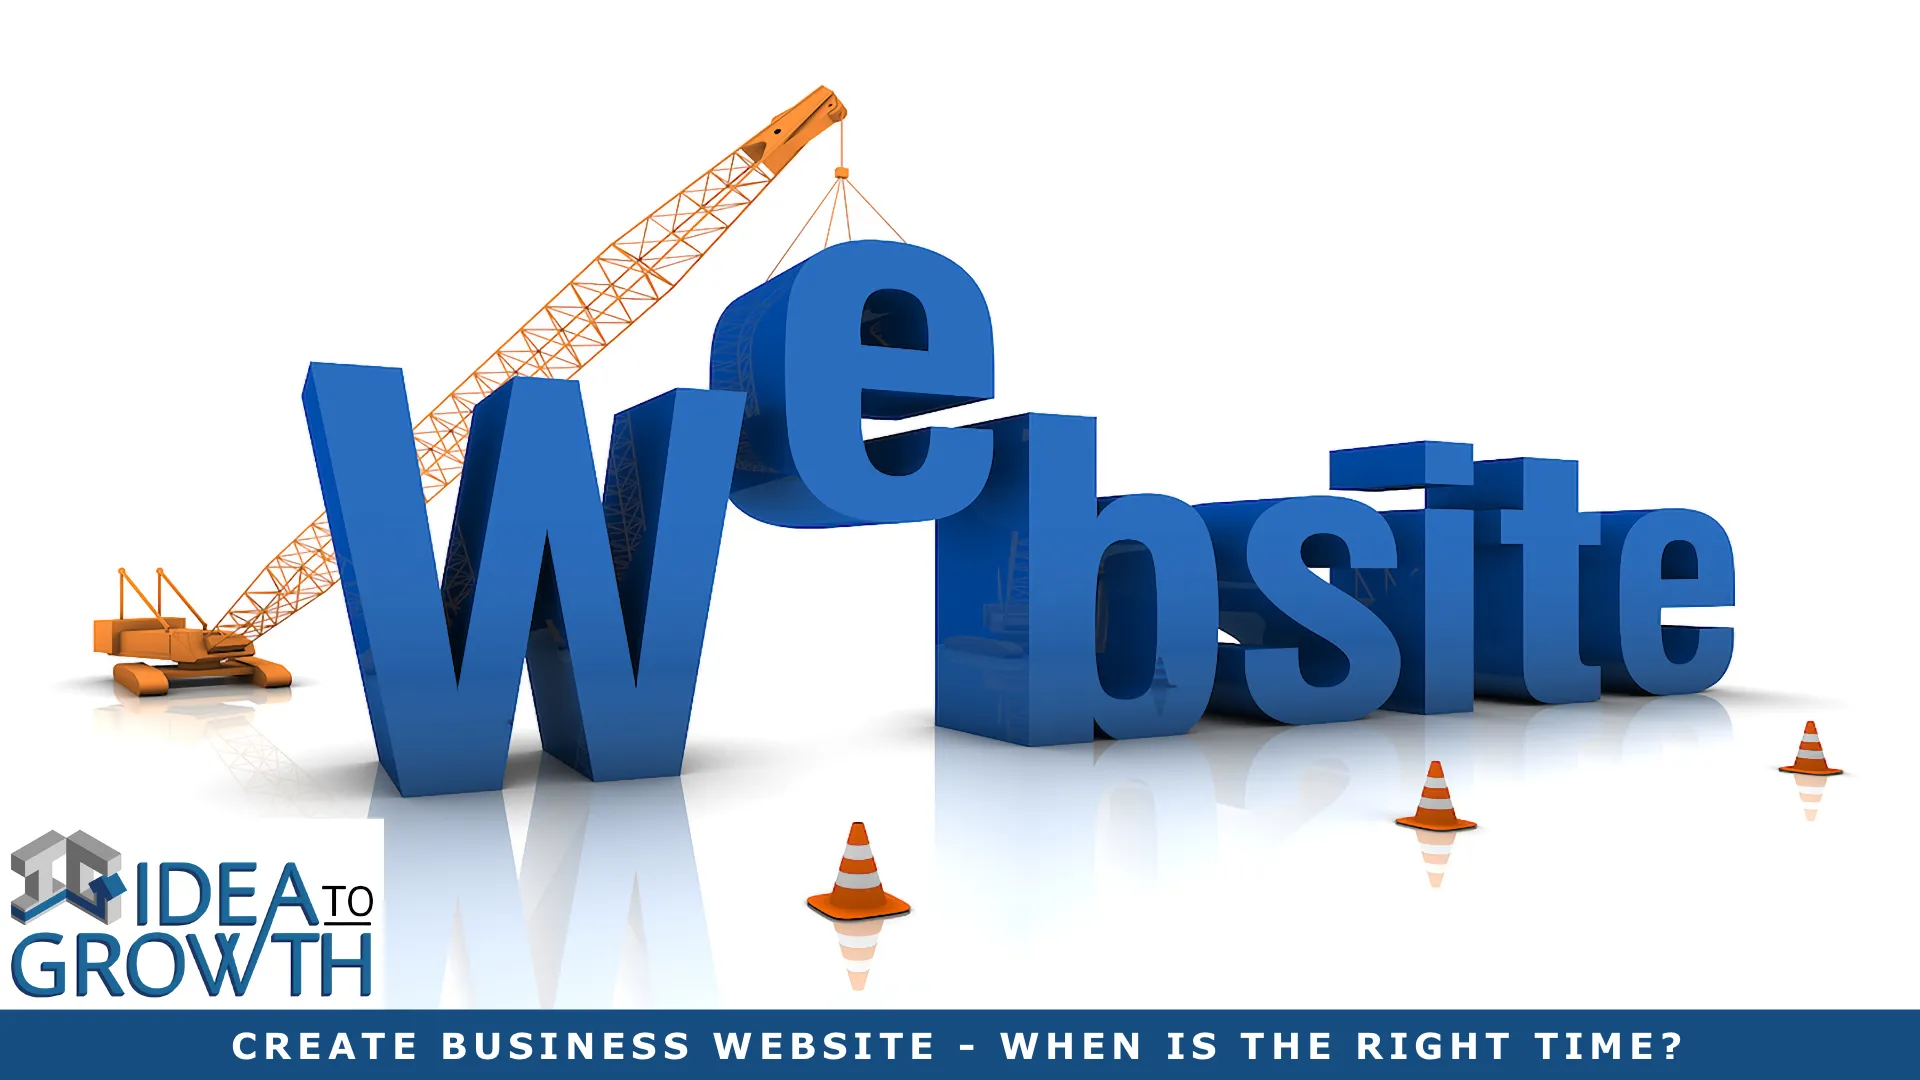 CREATE BUSINESS WEBSITE - WHEN IS THE RIGHT TIME​